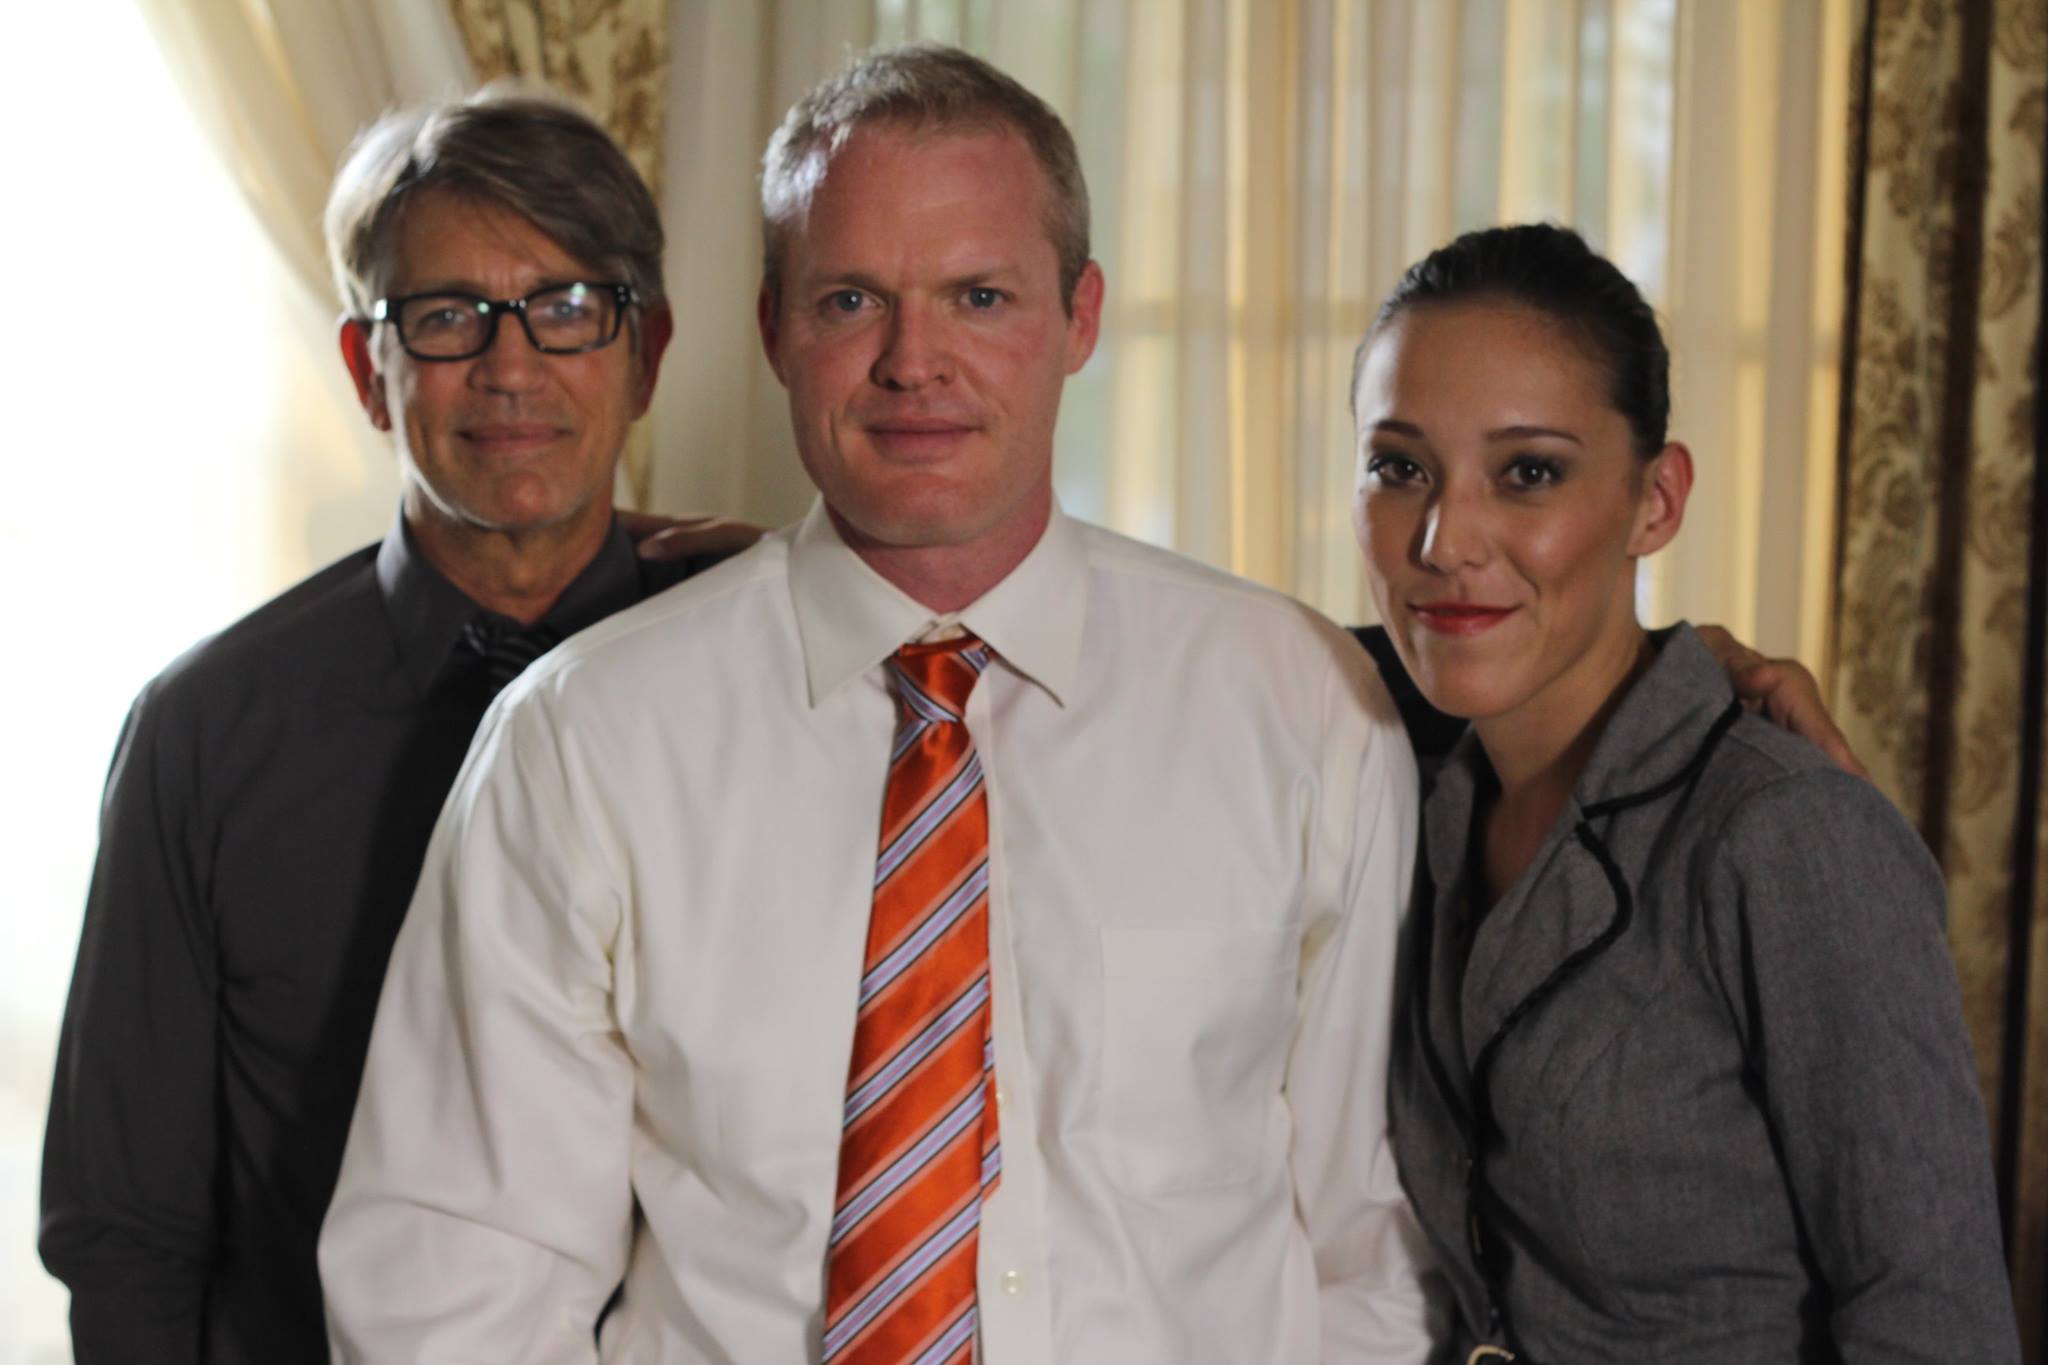 Bo Linton with Eric Roberts and Jessica Nagel on the set of Sangre Negra